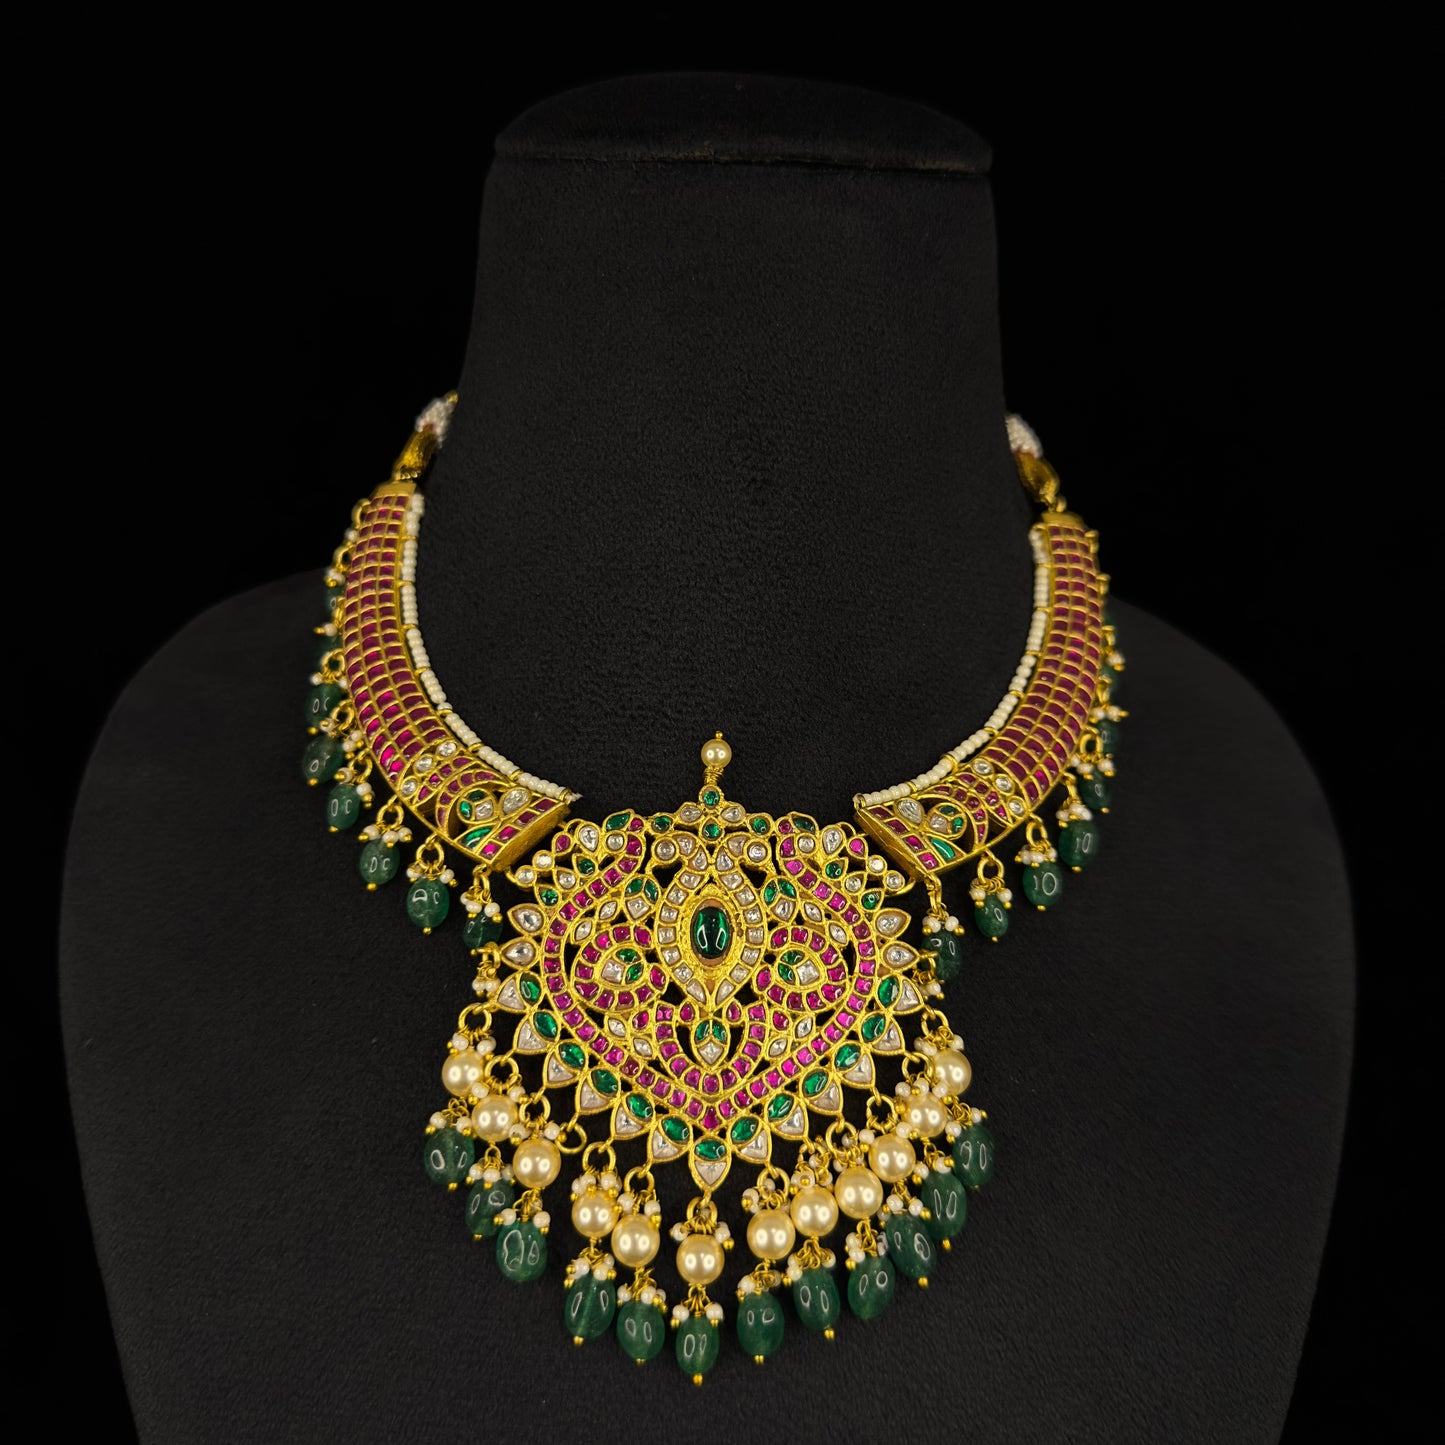 Radiant Jadau Kundan Kanti Necklace with Pearls and Beads with 22k Gold Plating This product belongs to jadau kundan jewellery category